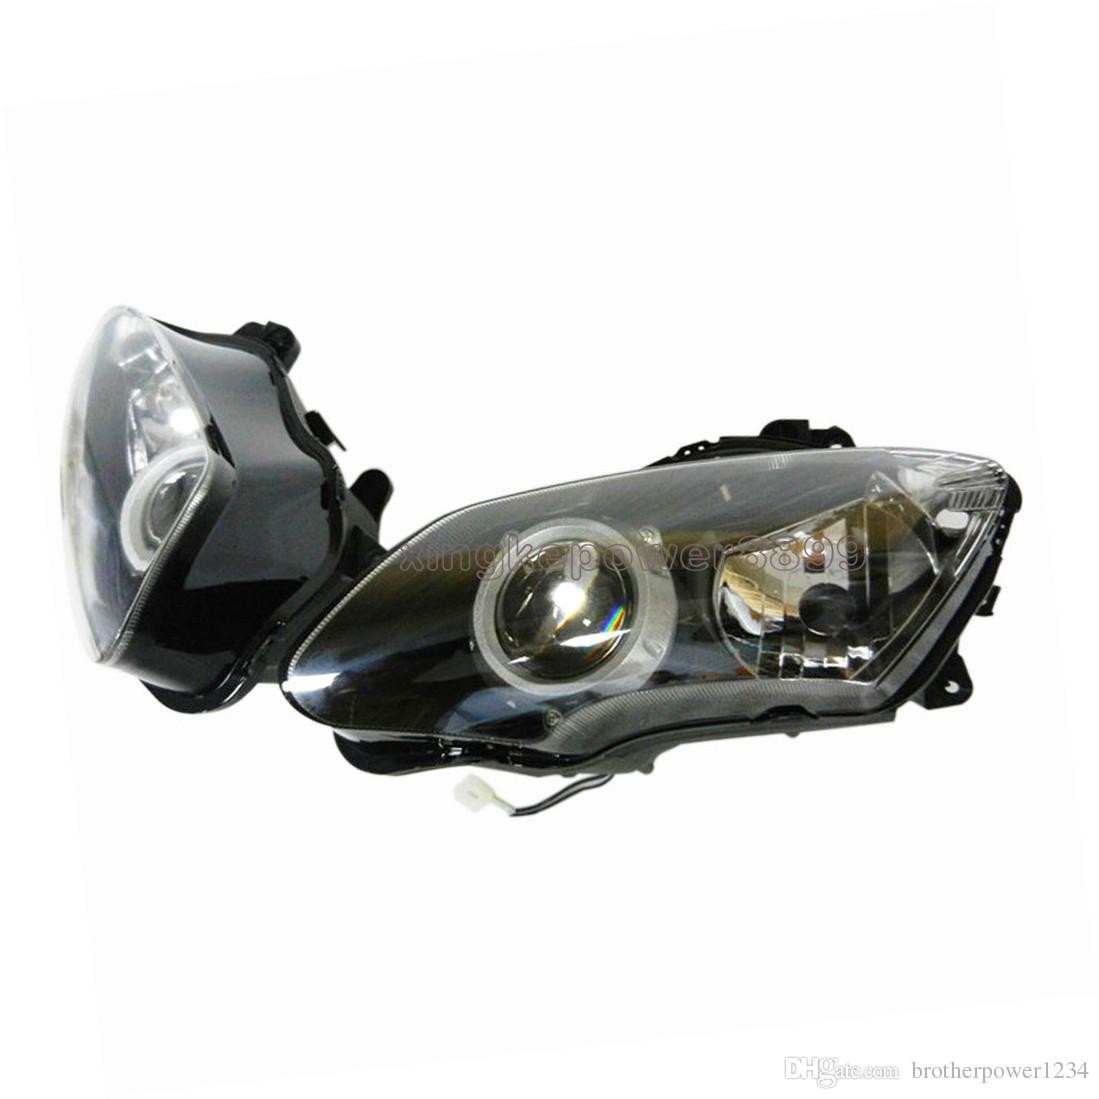 Headlight Assembly Front Head Lamp for Yamaha YZF R1 2007 2008 Headlight YAMAHA R1 2007 2008 line with $118 04 Pair on Brotherpower1234 s Store